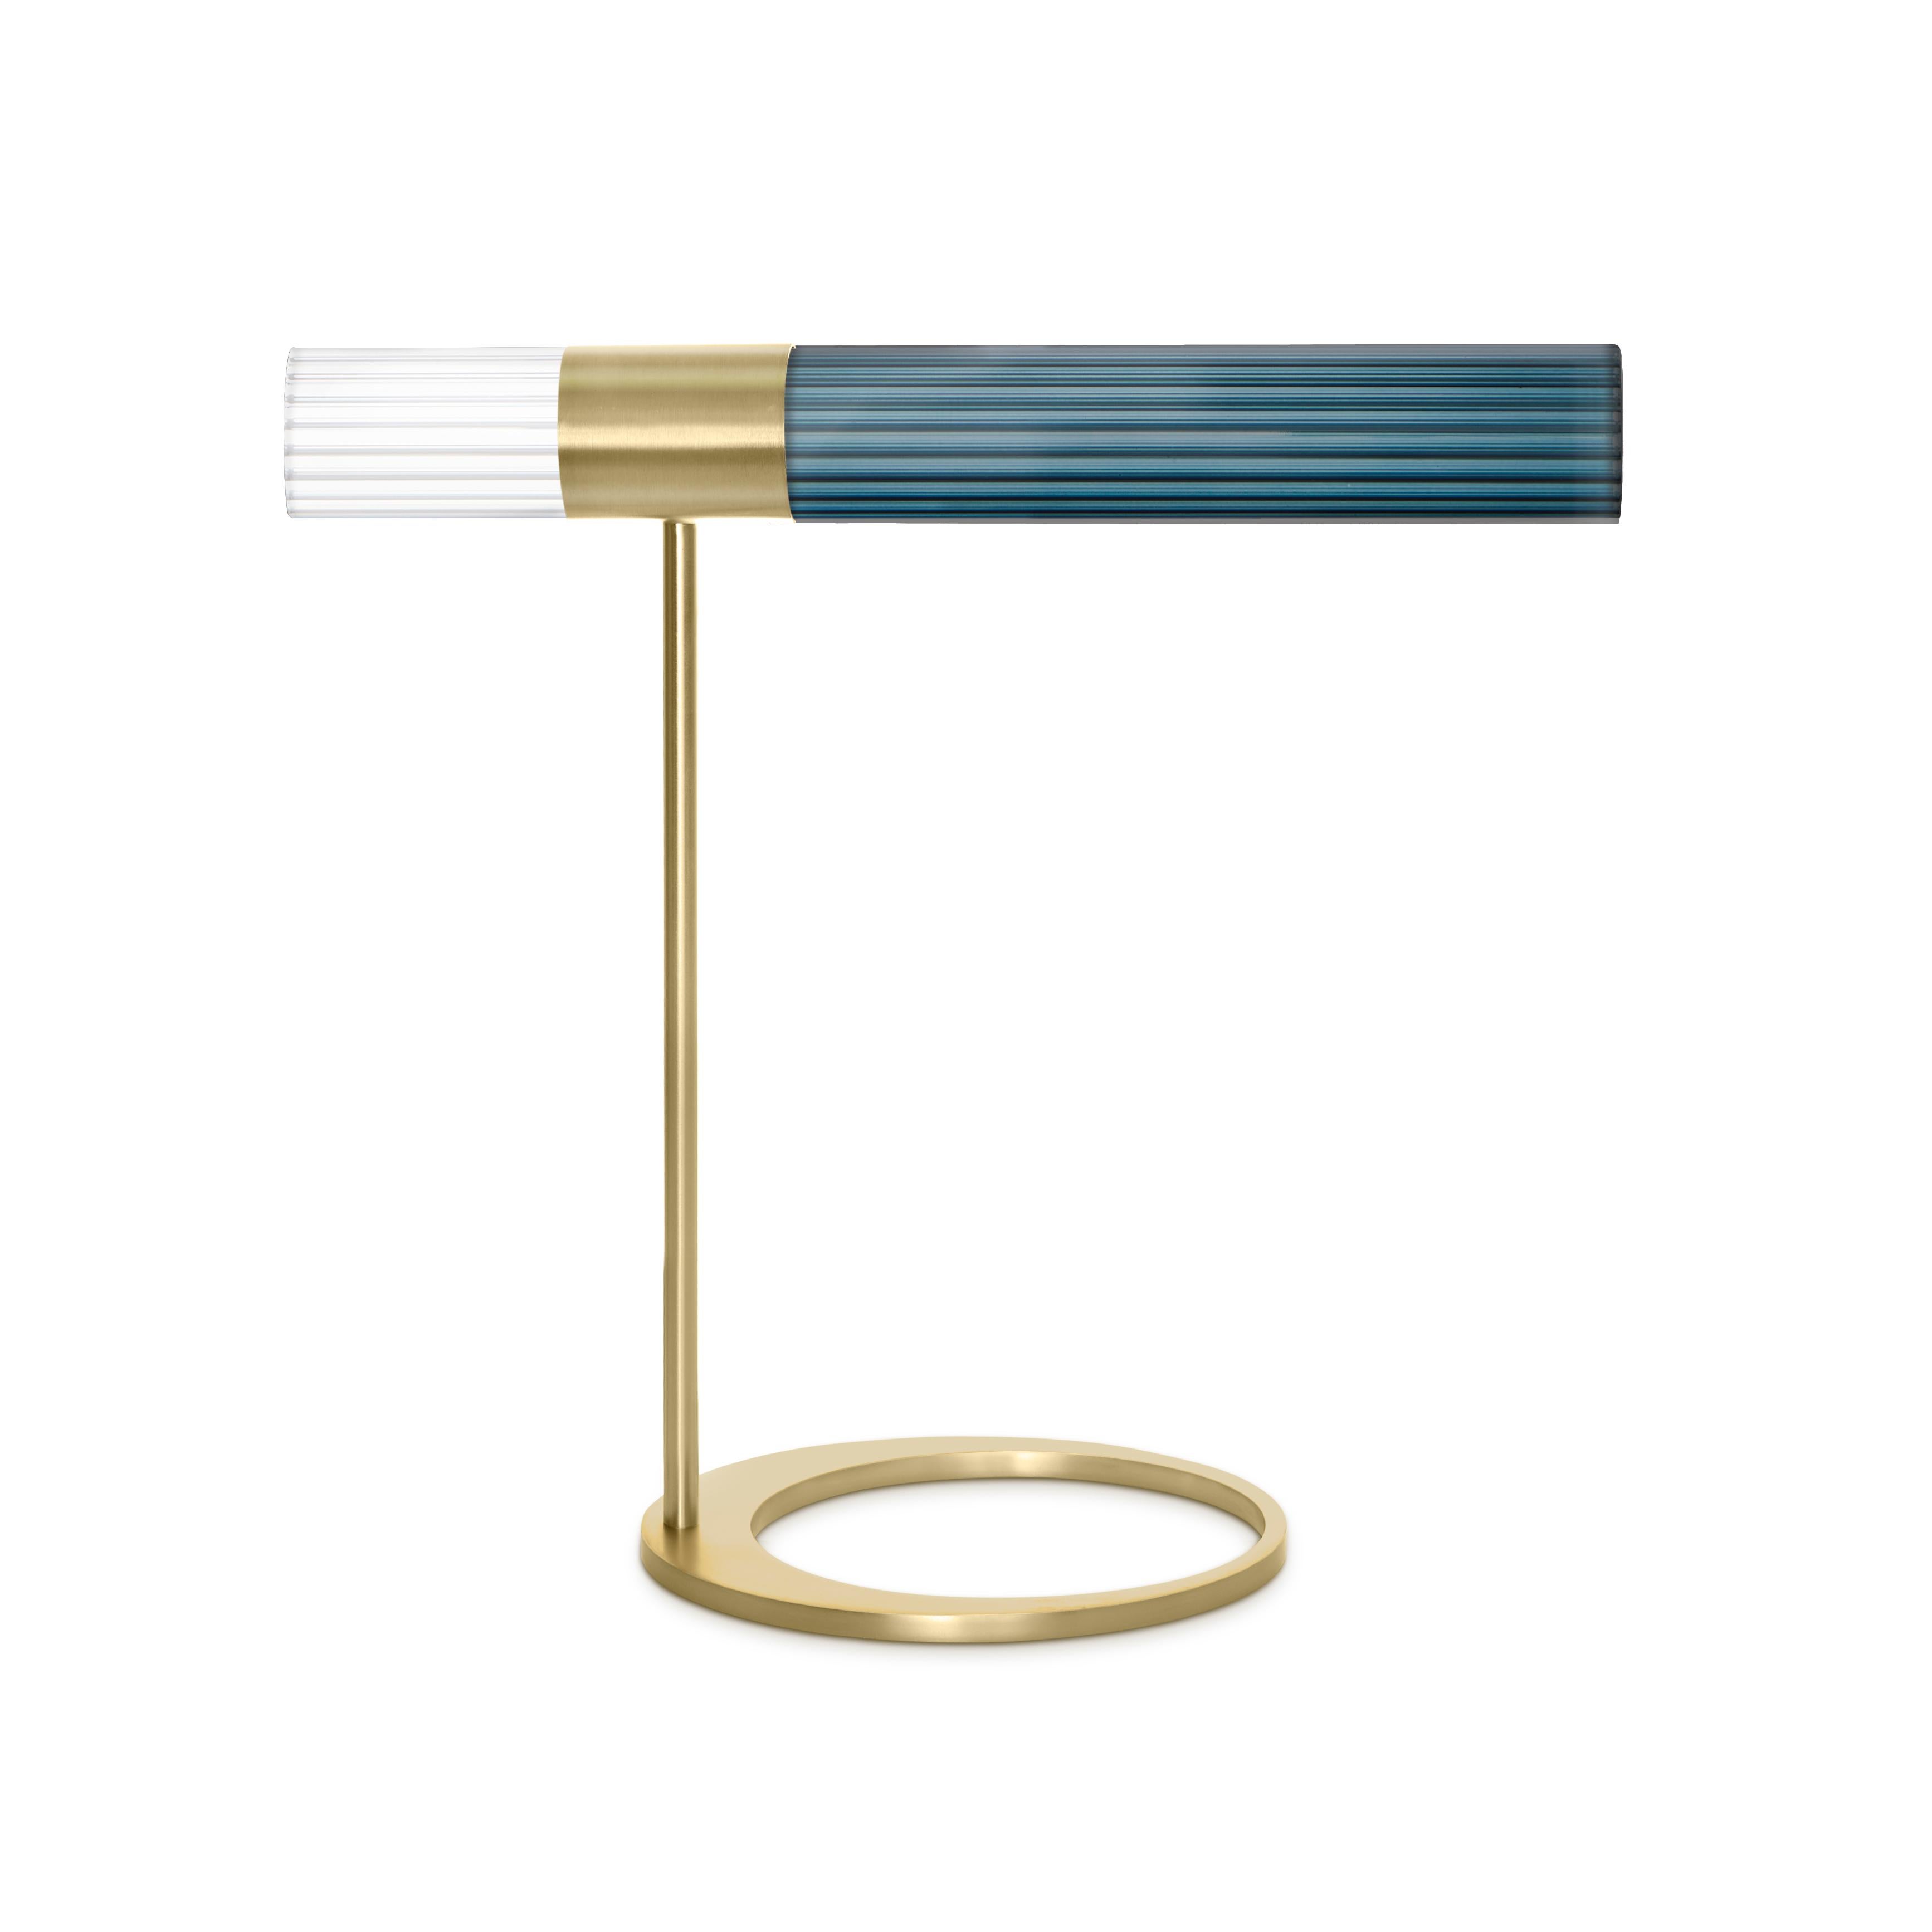 Sbarlusc table lamp by Luce Tu
Dimensions: 49 x 46 cm
Materials: Brass and glass

Sbarlusc in Milanese dialect represents the sparkle of a precious and very bright object. The colored glasses, which combine with each other creating games of